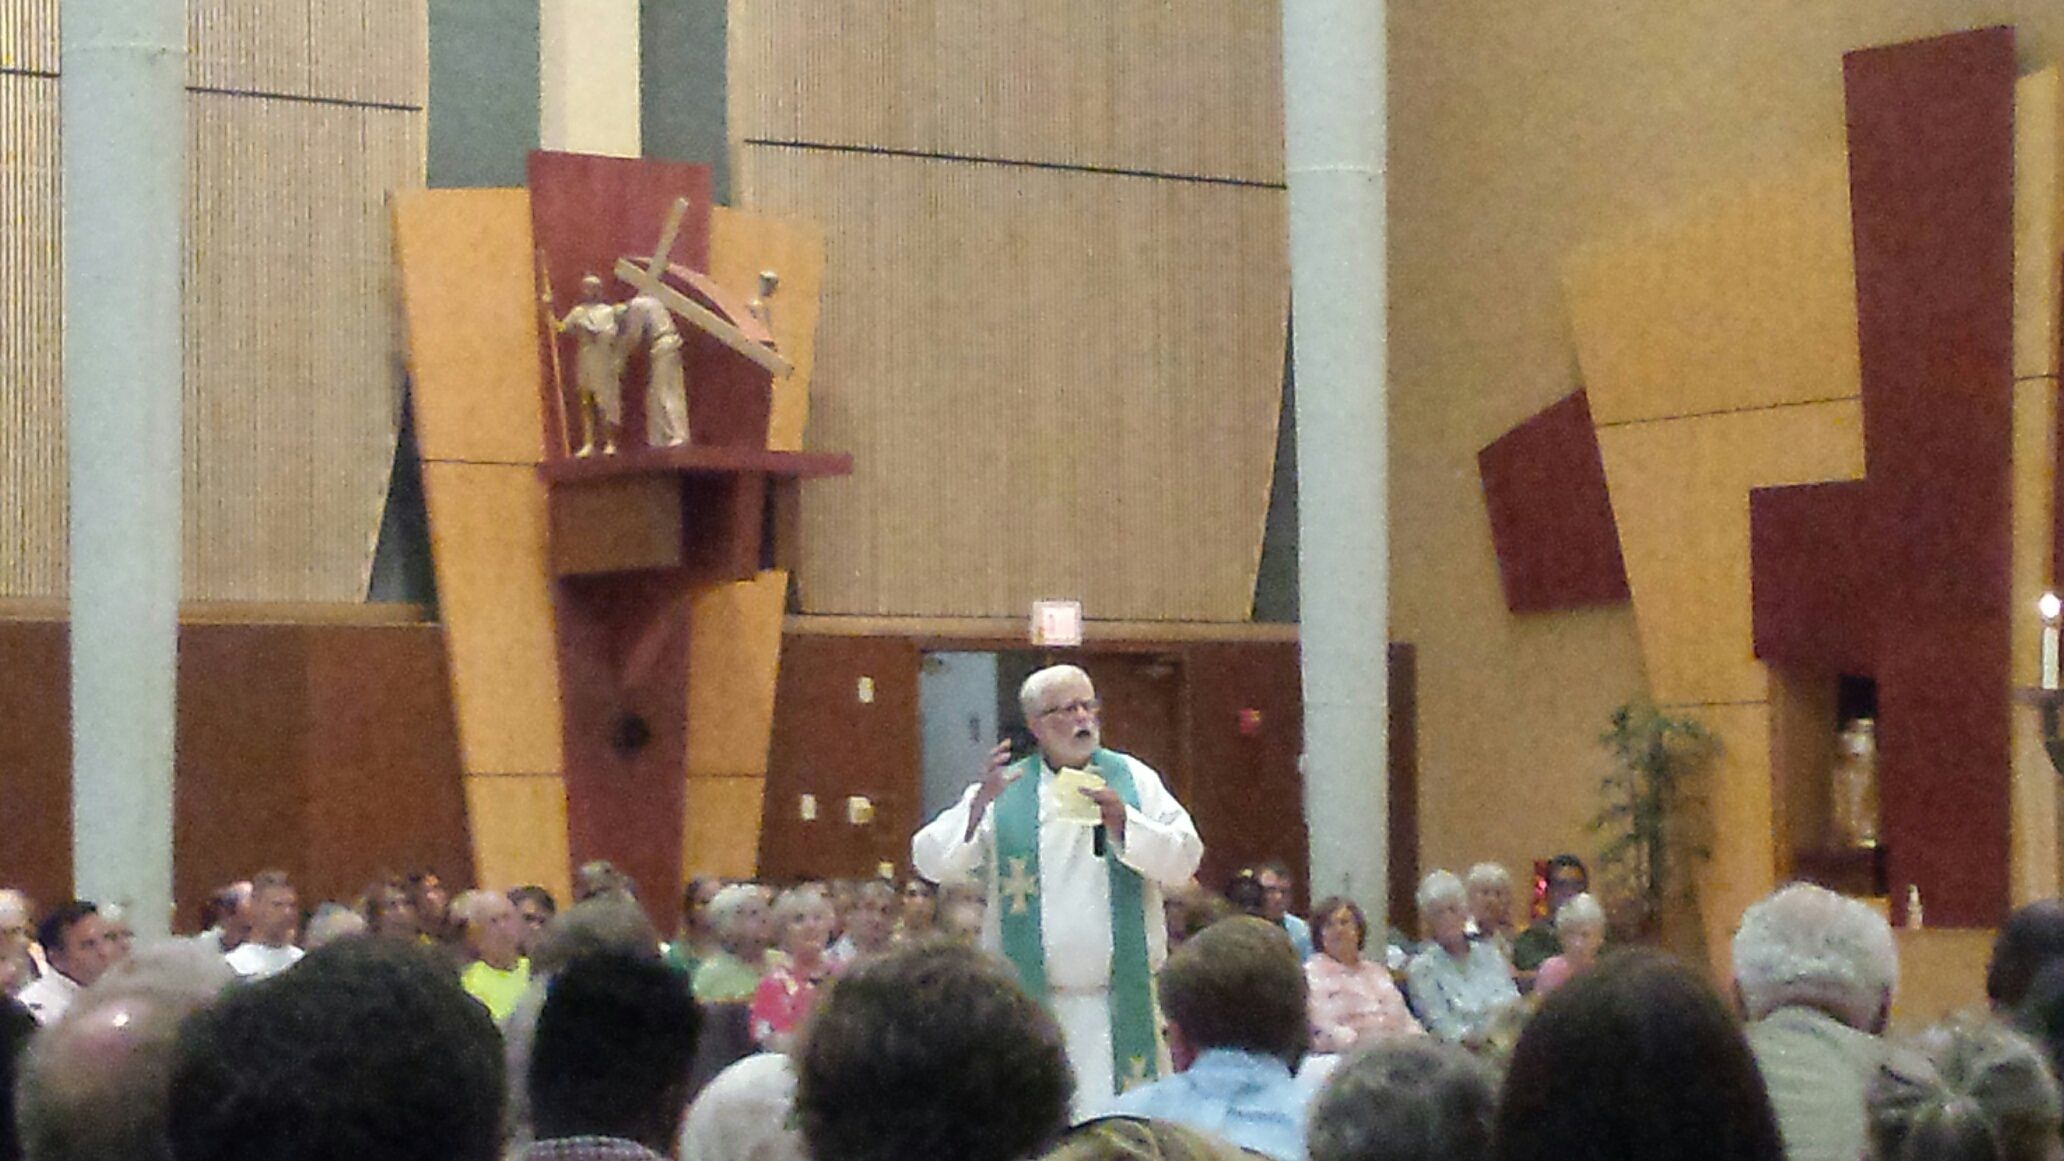 Father Robert Stiefvater gives the homily during Thursday night's mass at All Saints Parish.